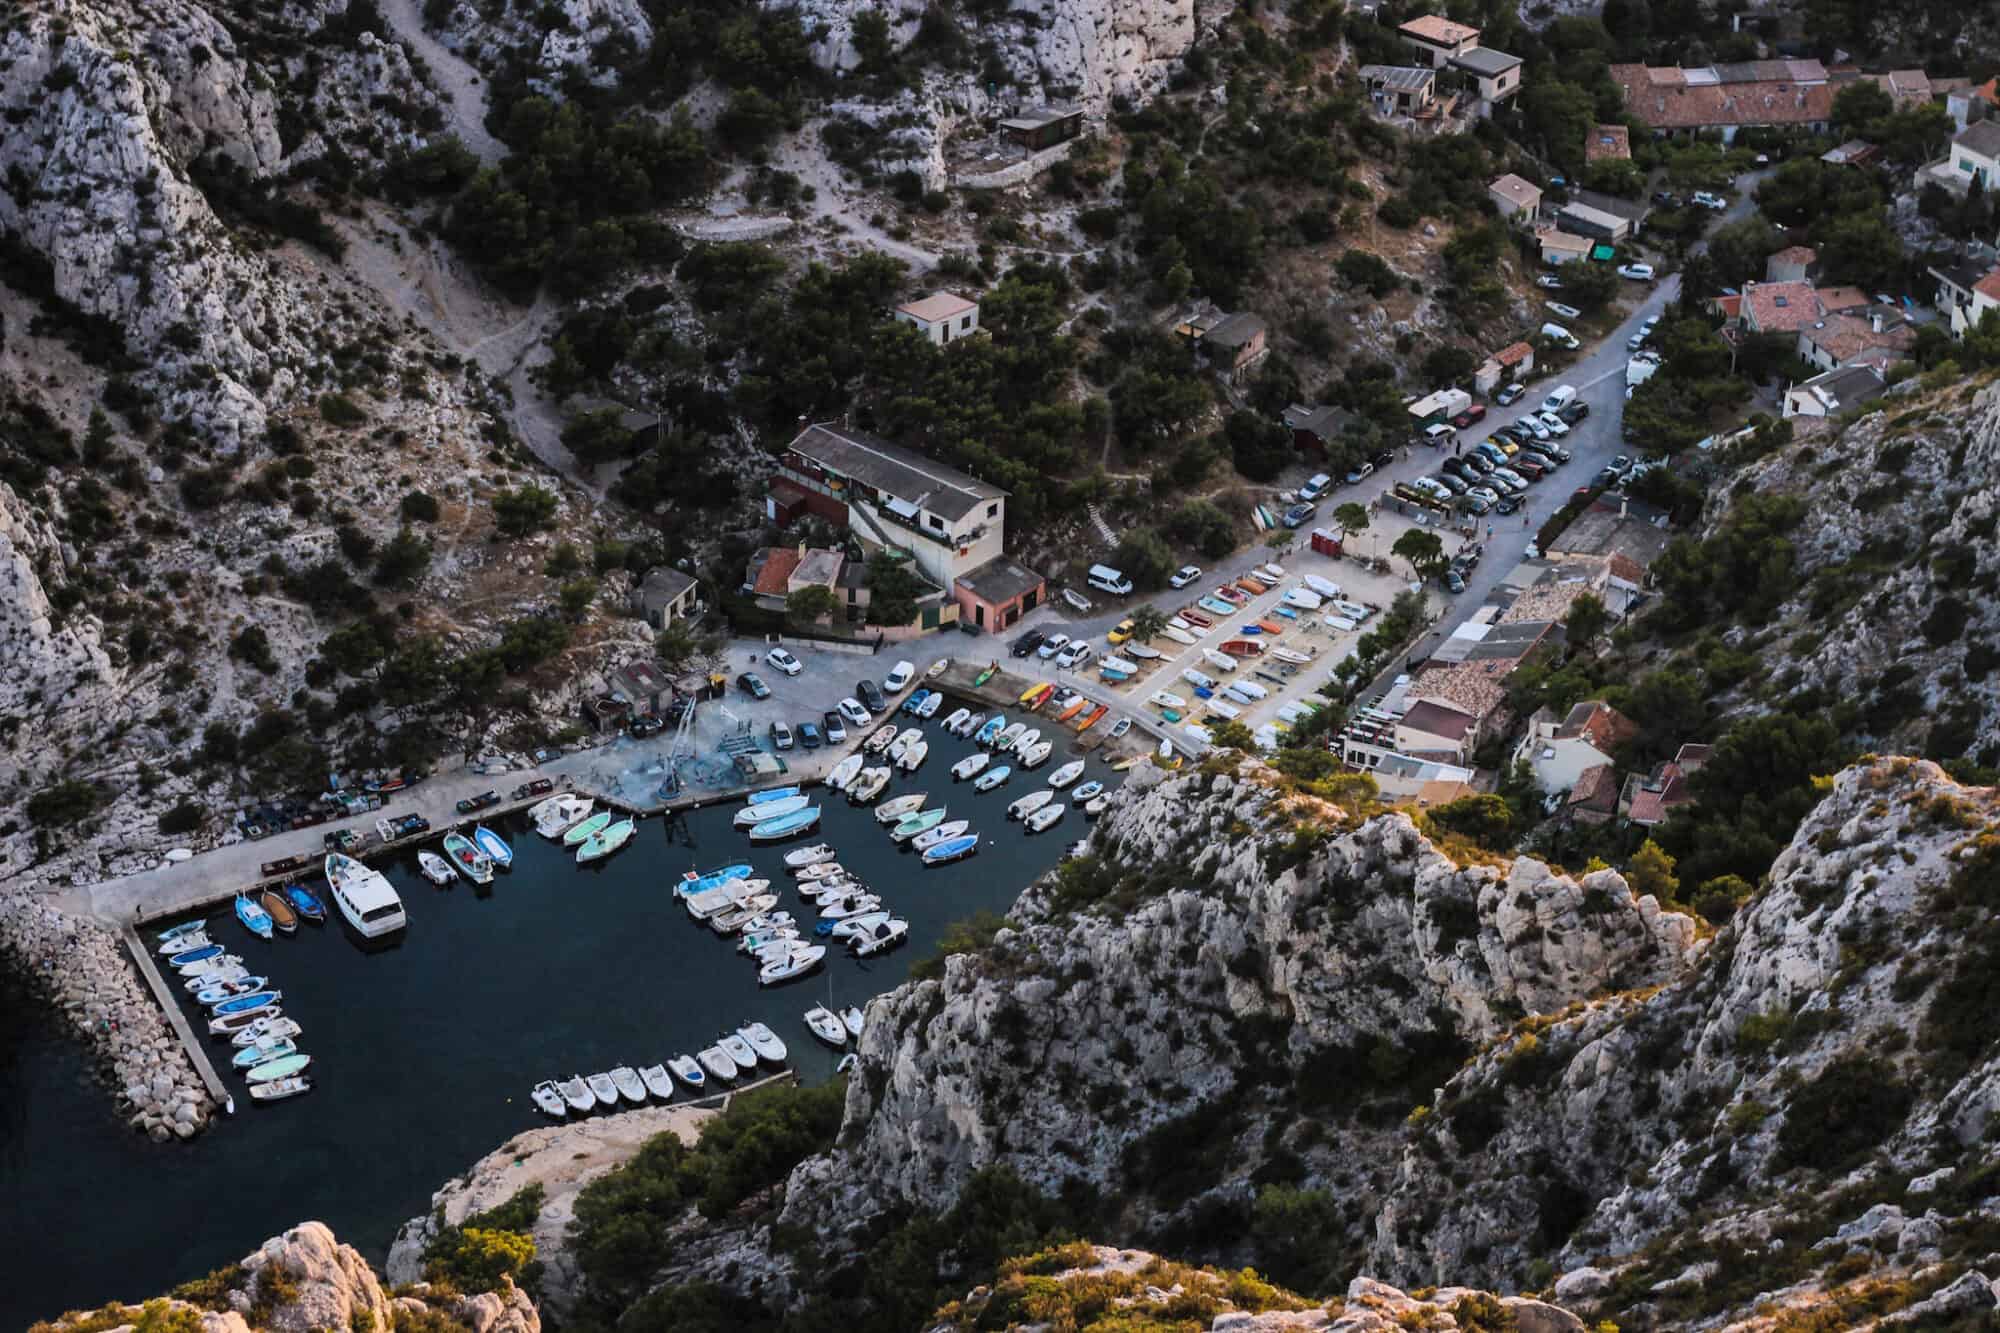 A rocky bay near in the South of France, crowded with small boats and dozens of parked cars next to it.